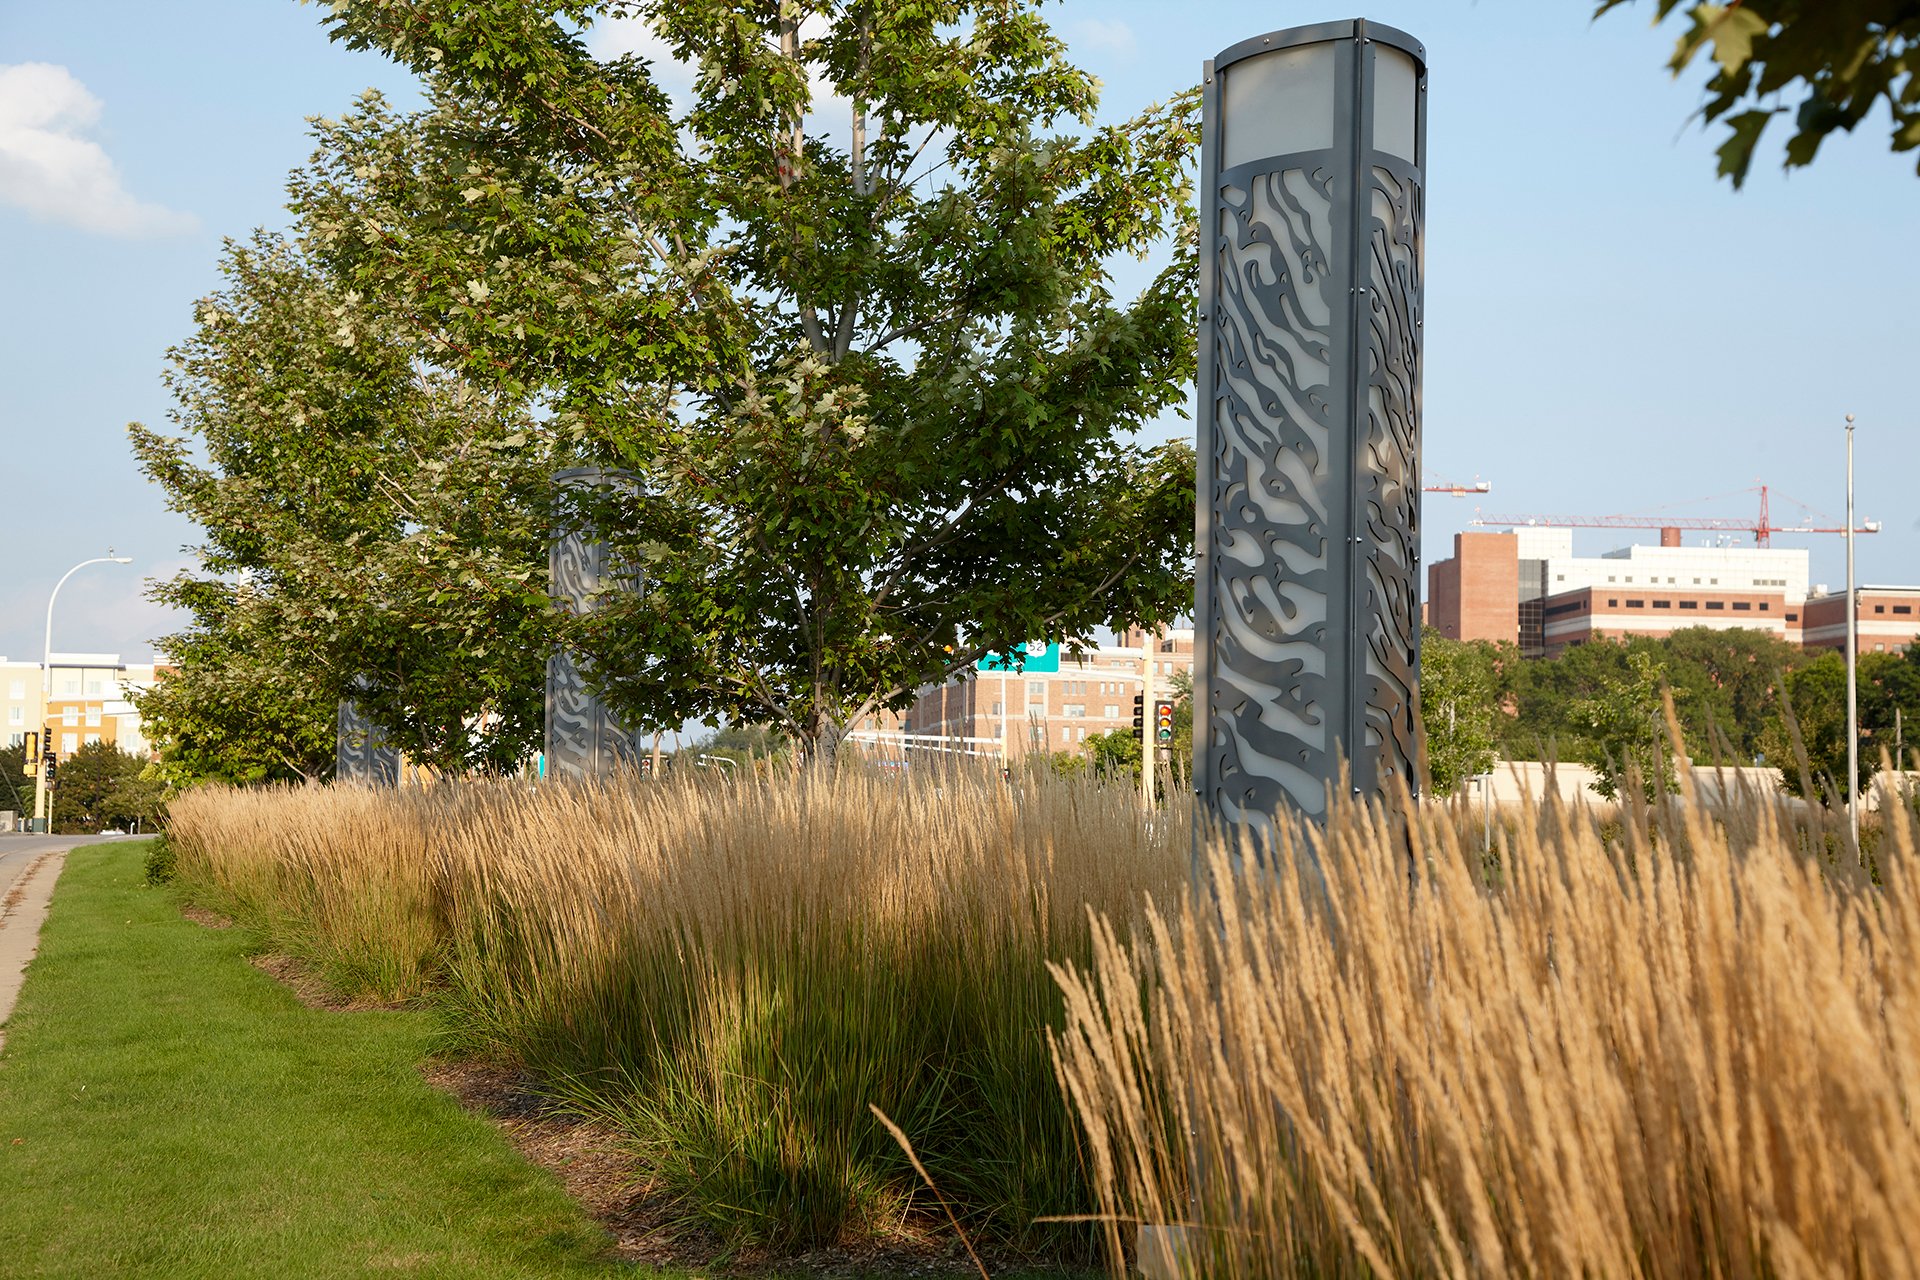 Photo of monument grasses along road